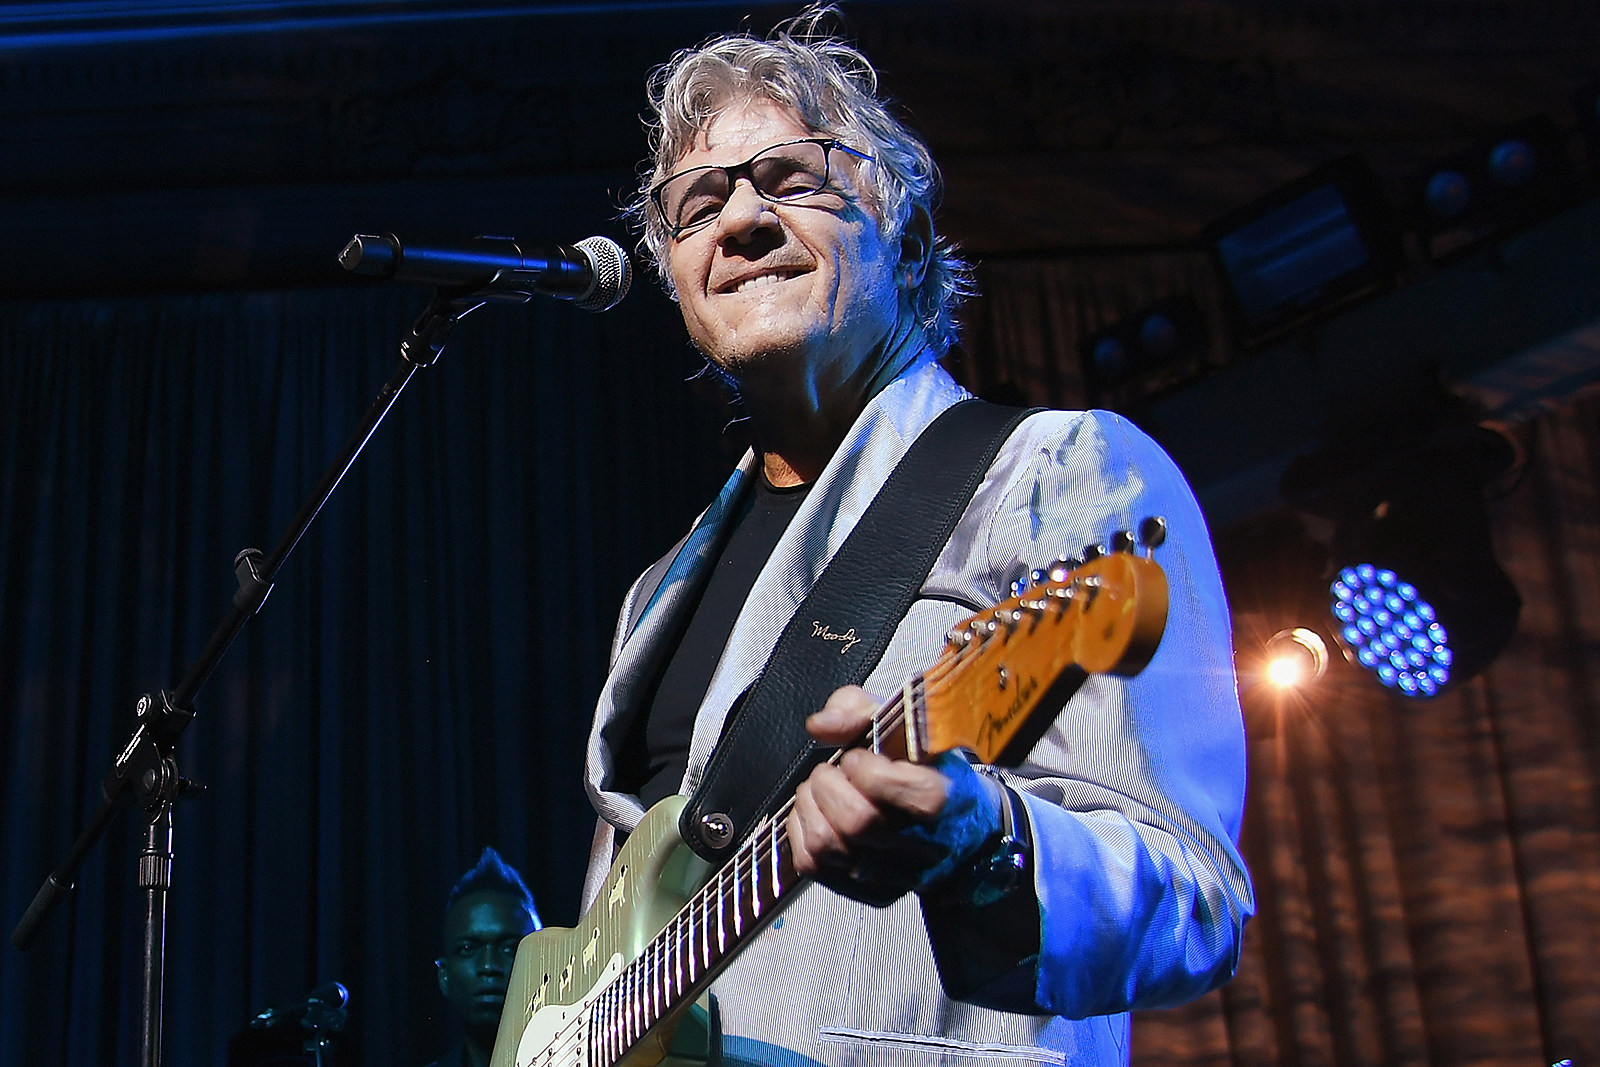 Steve Miller Band's Early LPs Collected in New Vinyl Box